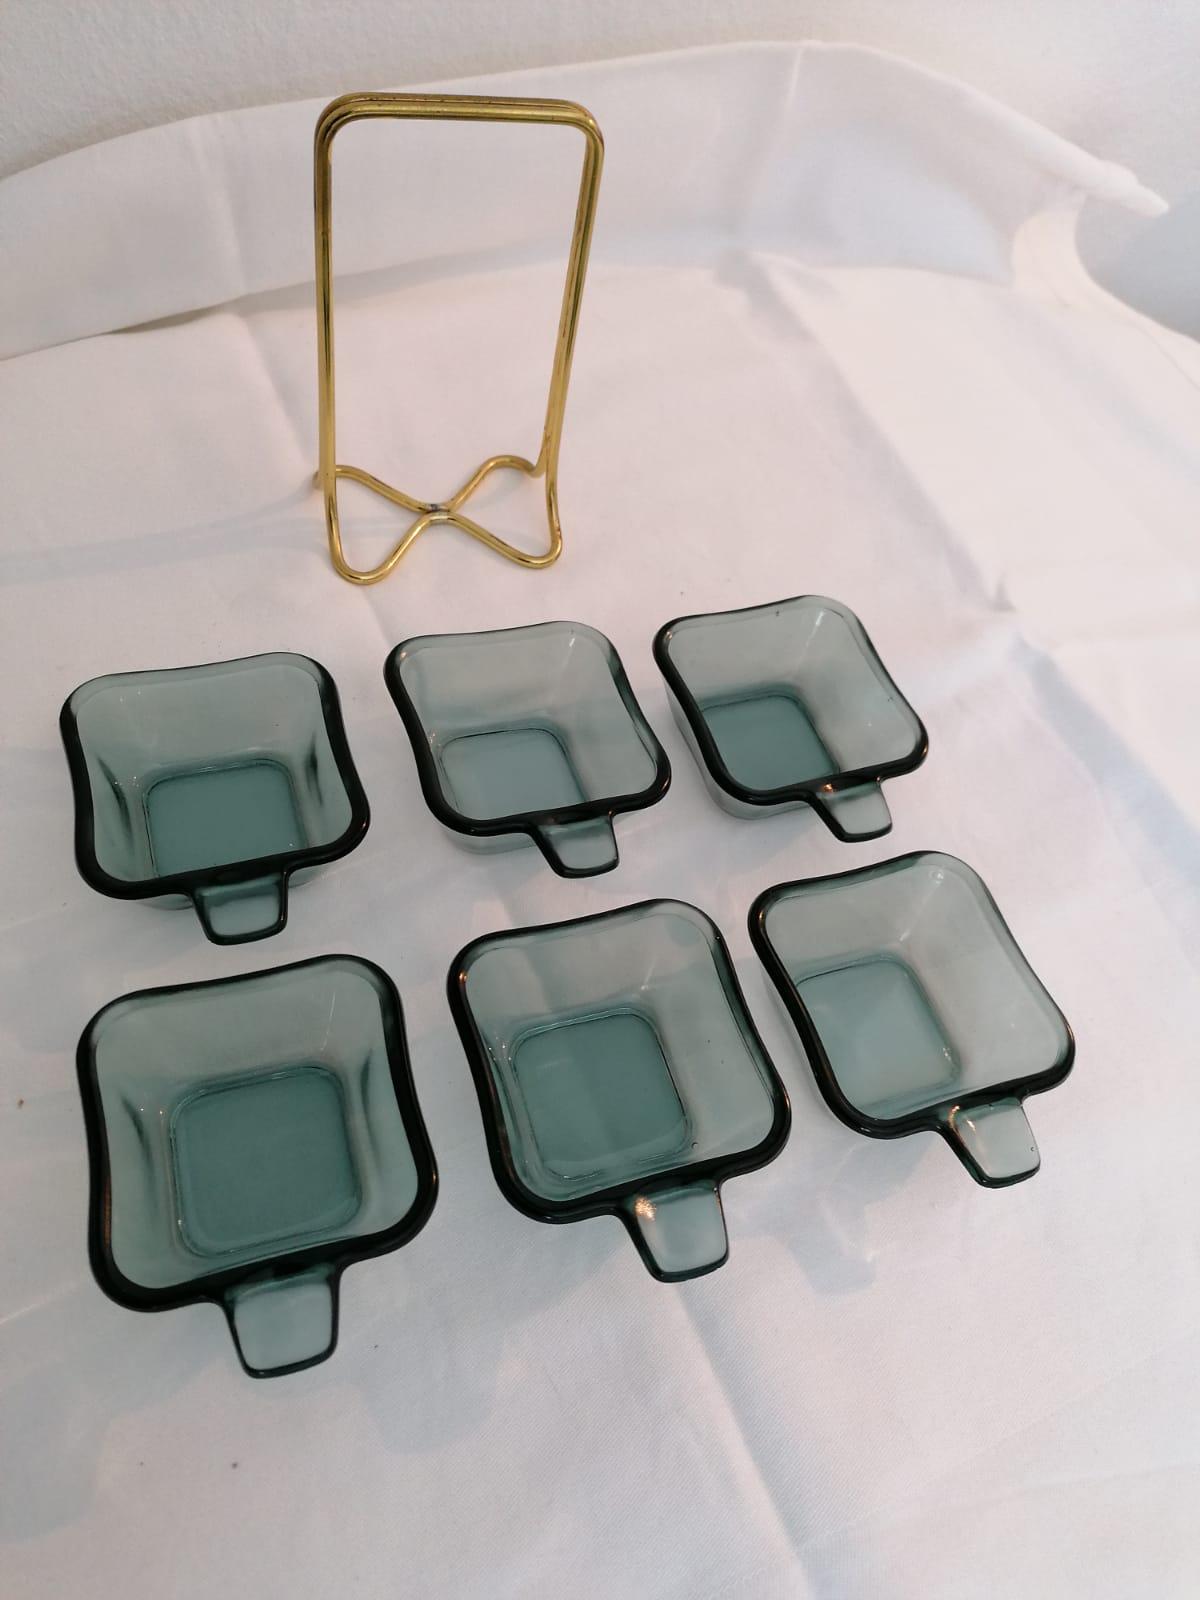 A set of six stackable ashtrays design in the 1950s by Wilhelm Wagenfeld for WMF (Würtenbergische Metallwaren Fabrik)
Brass frame green glass trays marked with WMF.